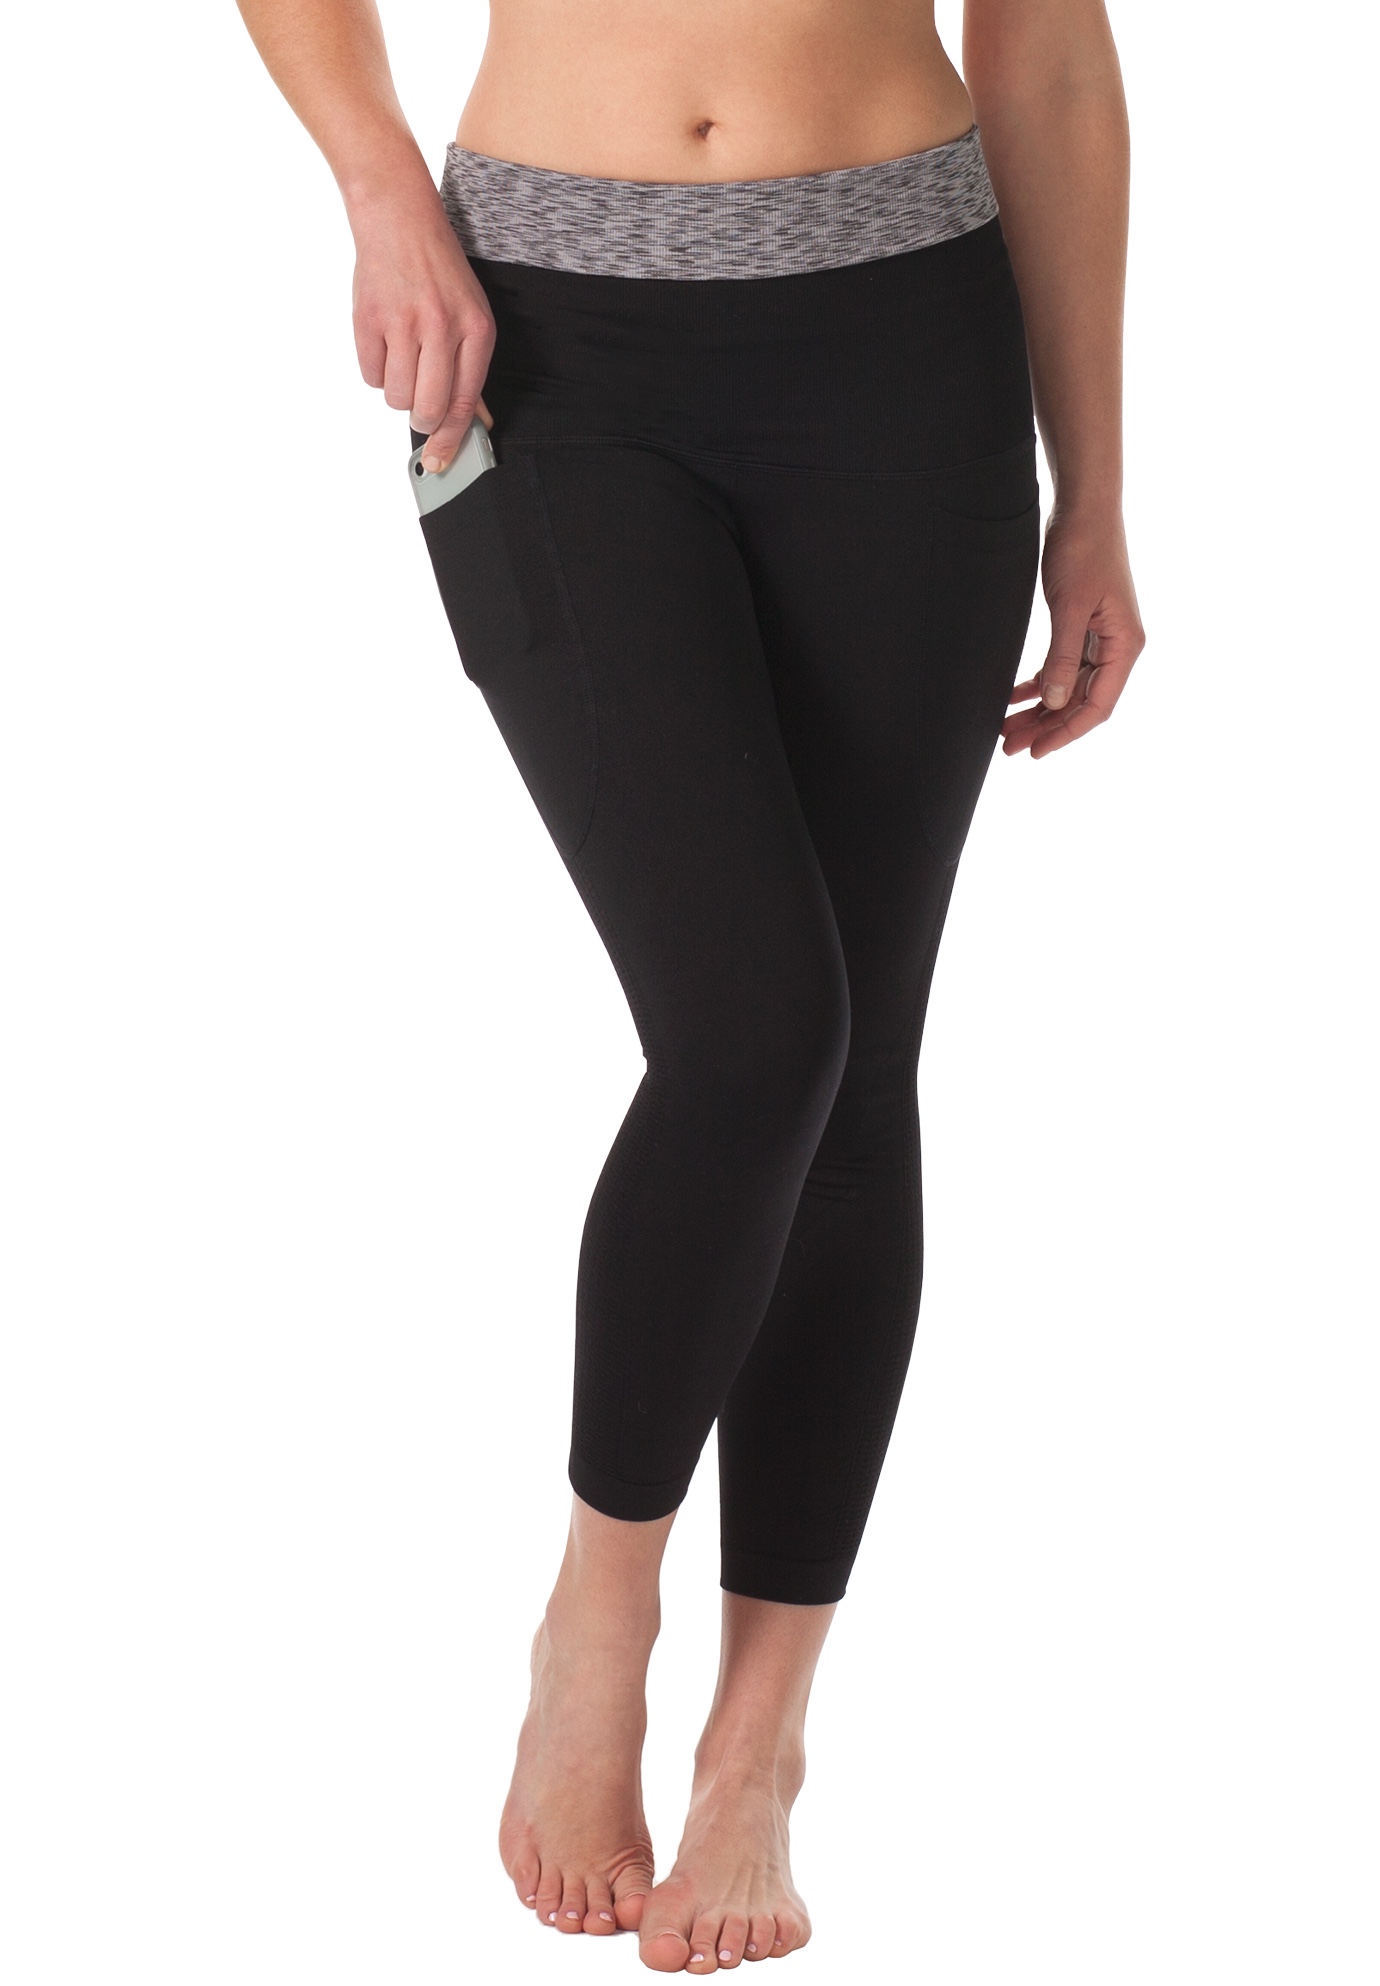 MOTHERS ESSENTIALS Postpartum High Waist Tummy Compression Control Slimming  Leggings (XSmall, Black) at Amazon Women's Clothing store